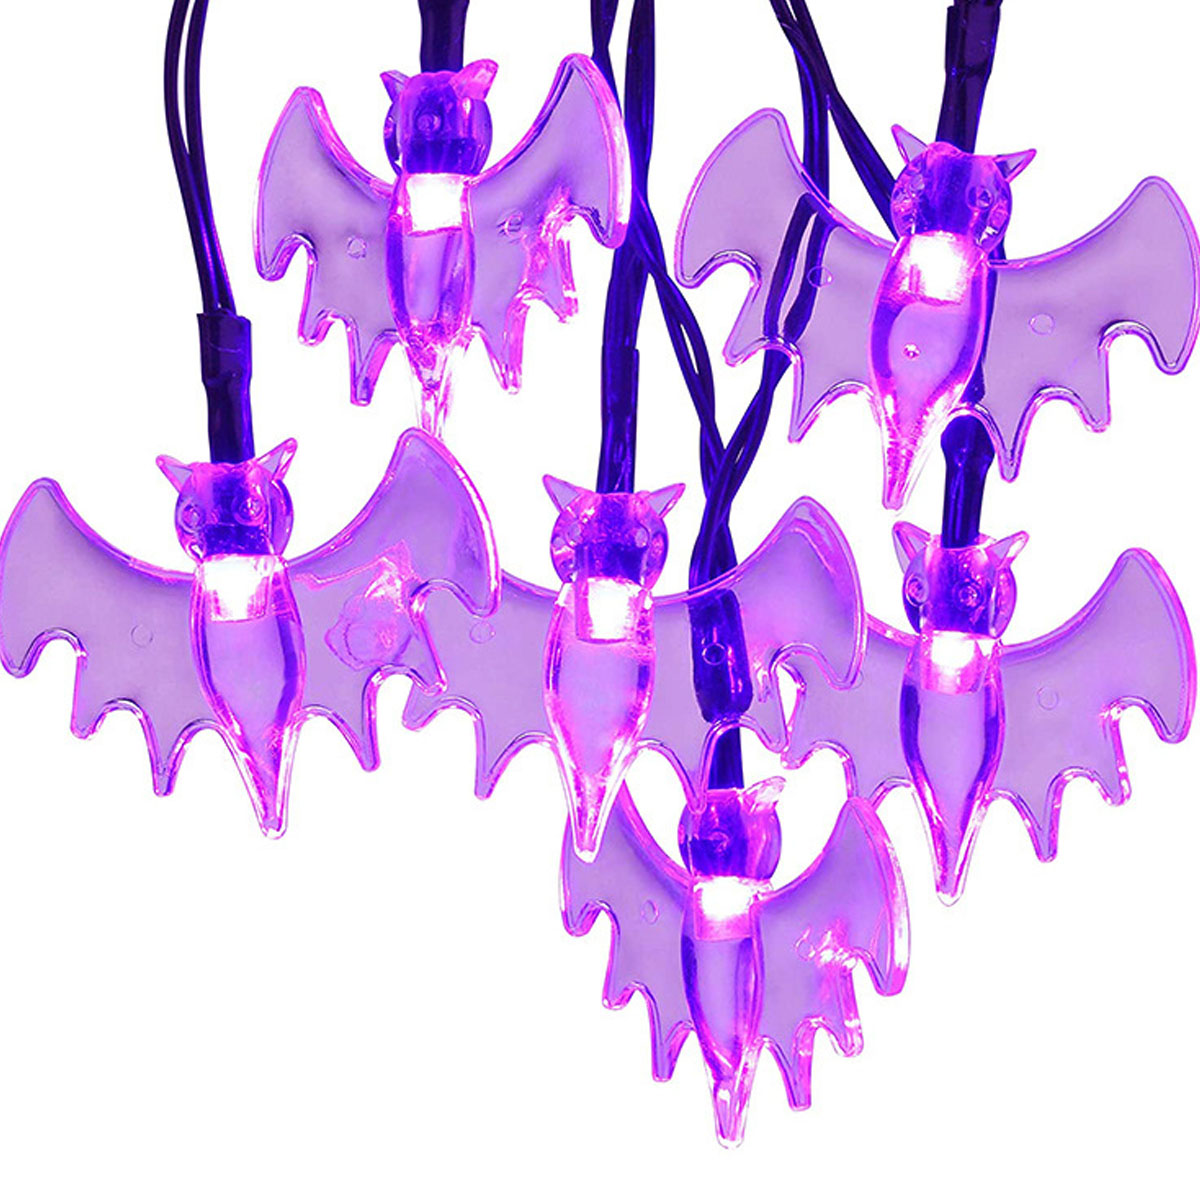 65M-30-LED-Ball-Solar-Halloween-Party-Fairy-Outdoor-String-Lights-for-Patio-Garden-8-Mode-Adjustment-1741092-6